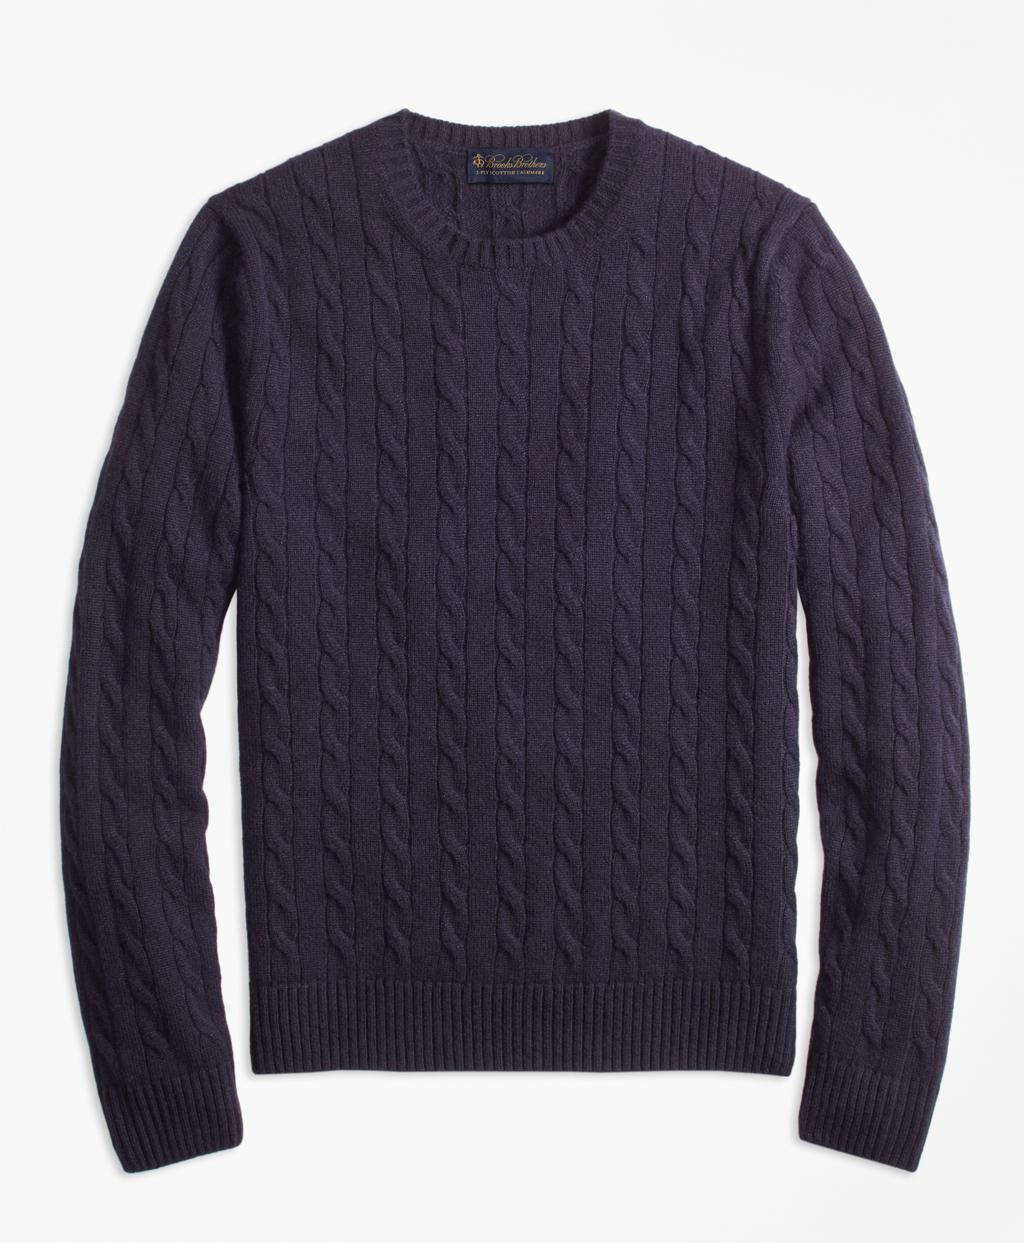 Lyst - Brooks Brothers Two-ply Cashmere Cable Crewneck Sweater in Blue ...